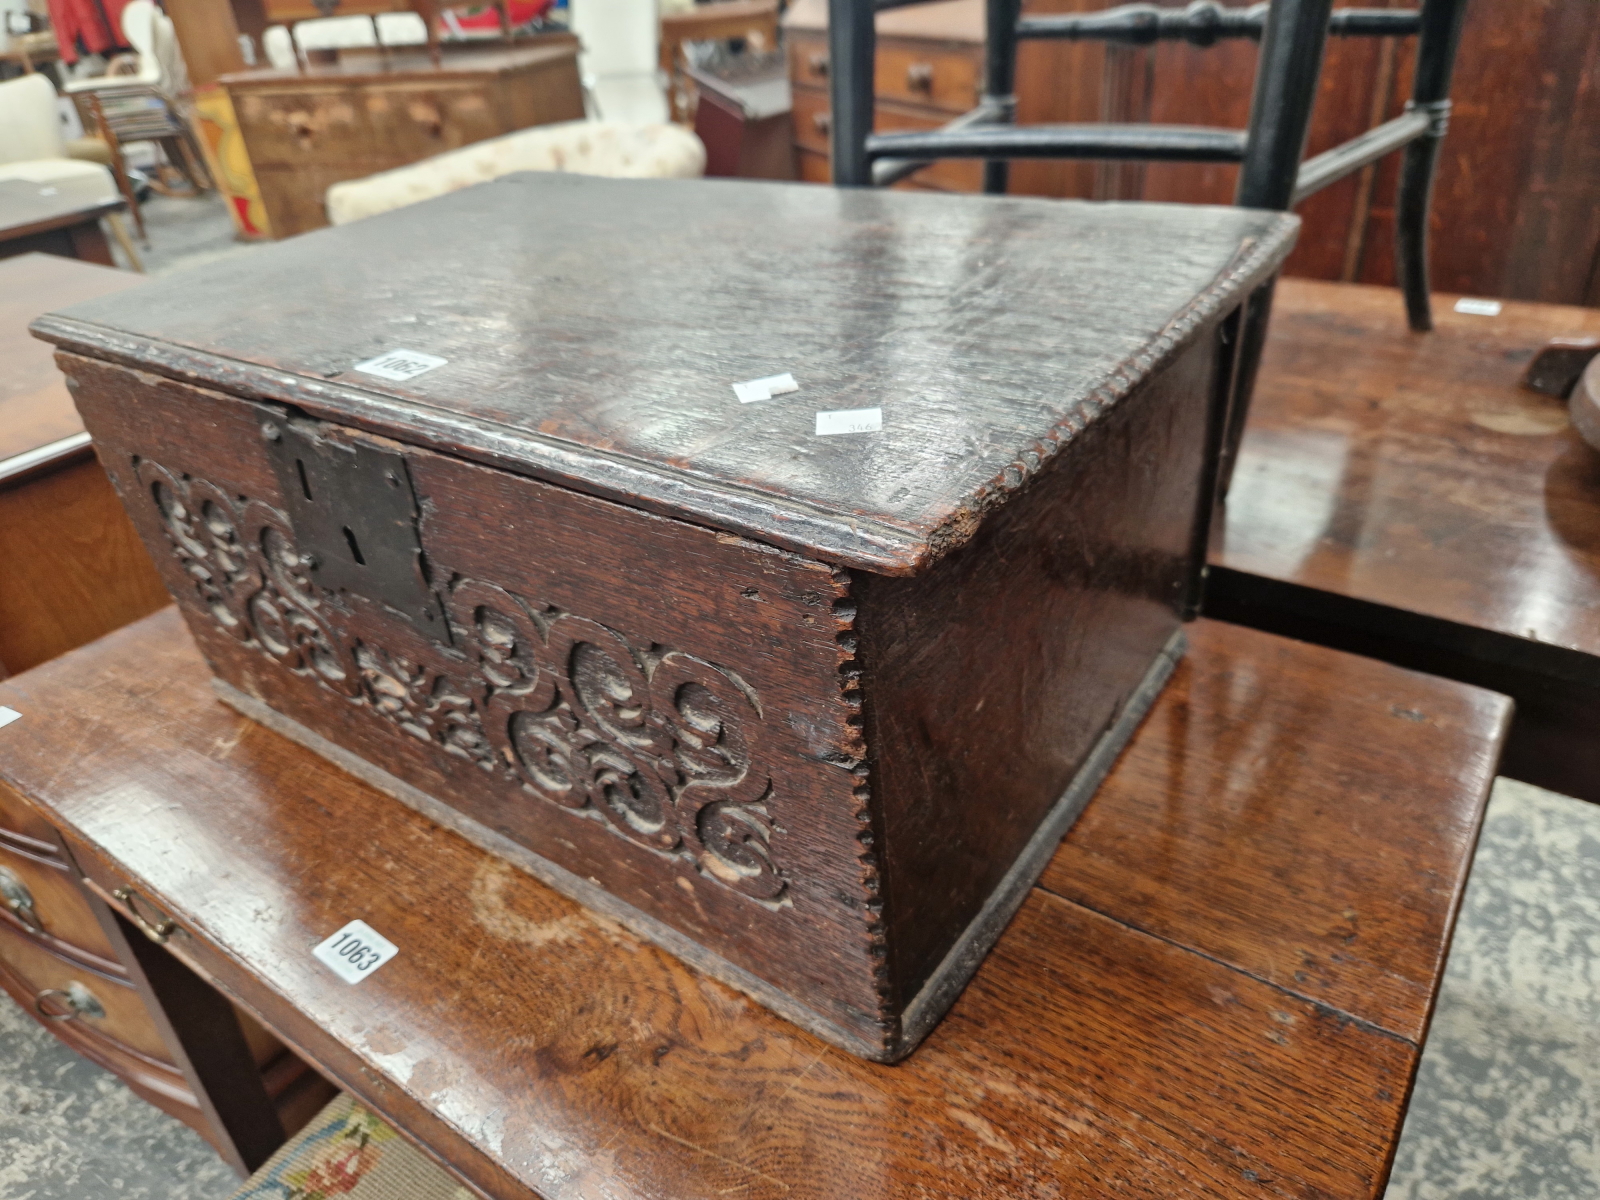 A LATE 17th/EARLY 18th C. OAK BIBLE BOX WITH AN S-SCROLL BAND CARVED TO THE FRONT - Image 4 of 5